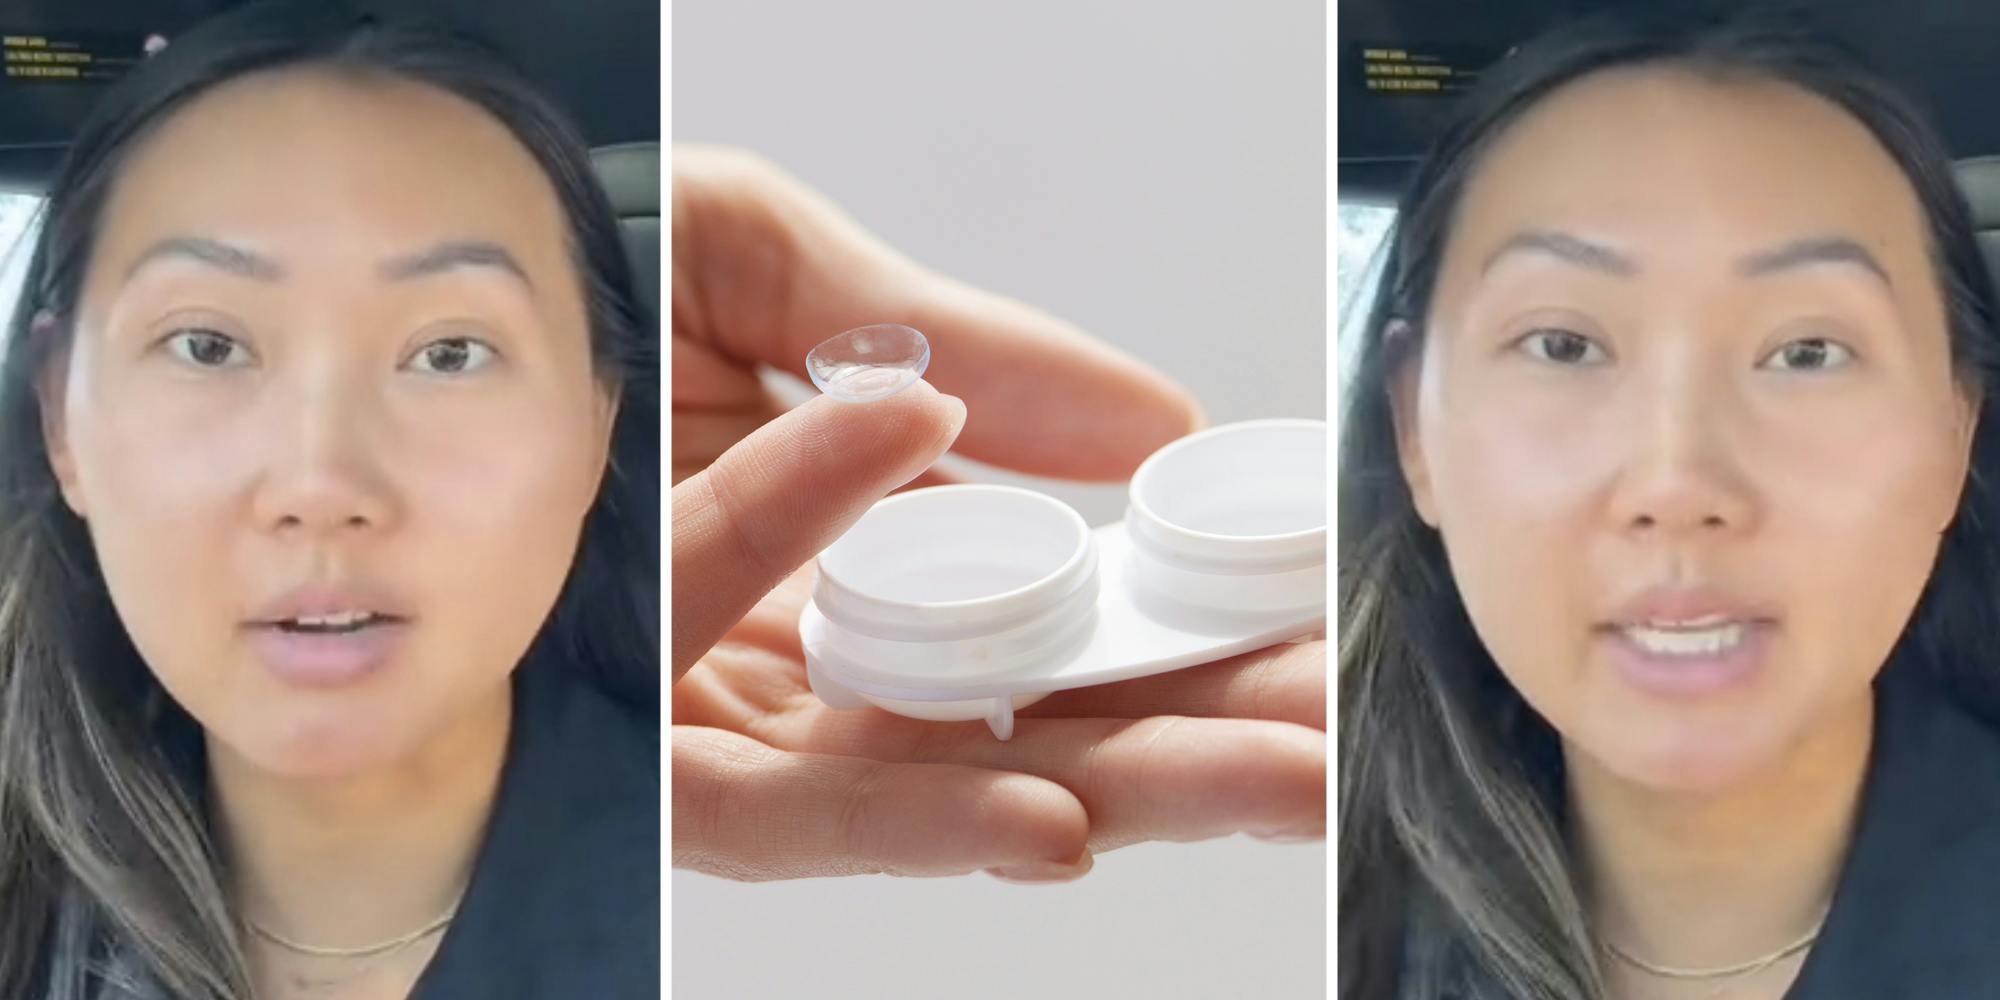 ‘I spend over $1,000 a year on my contacts’: Woman says eye doctor told her she gets contacts for free—and you might, too - The Daily Dot